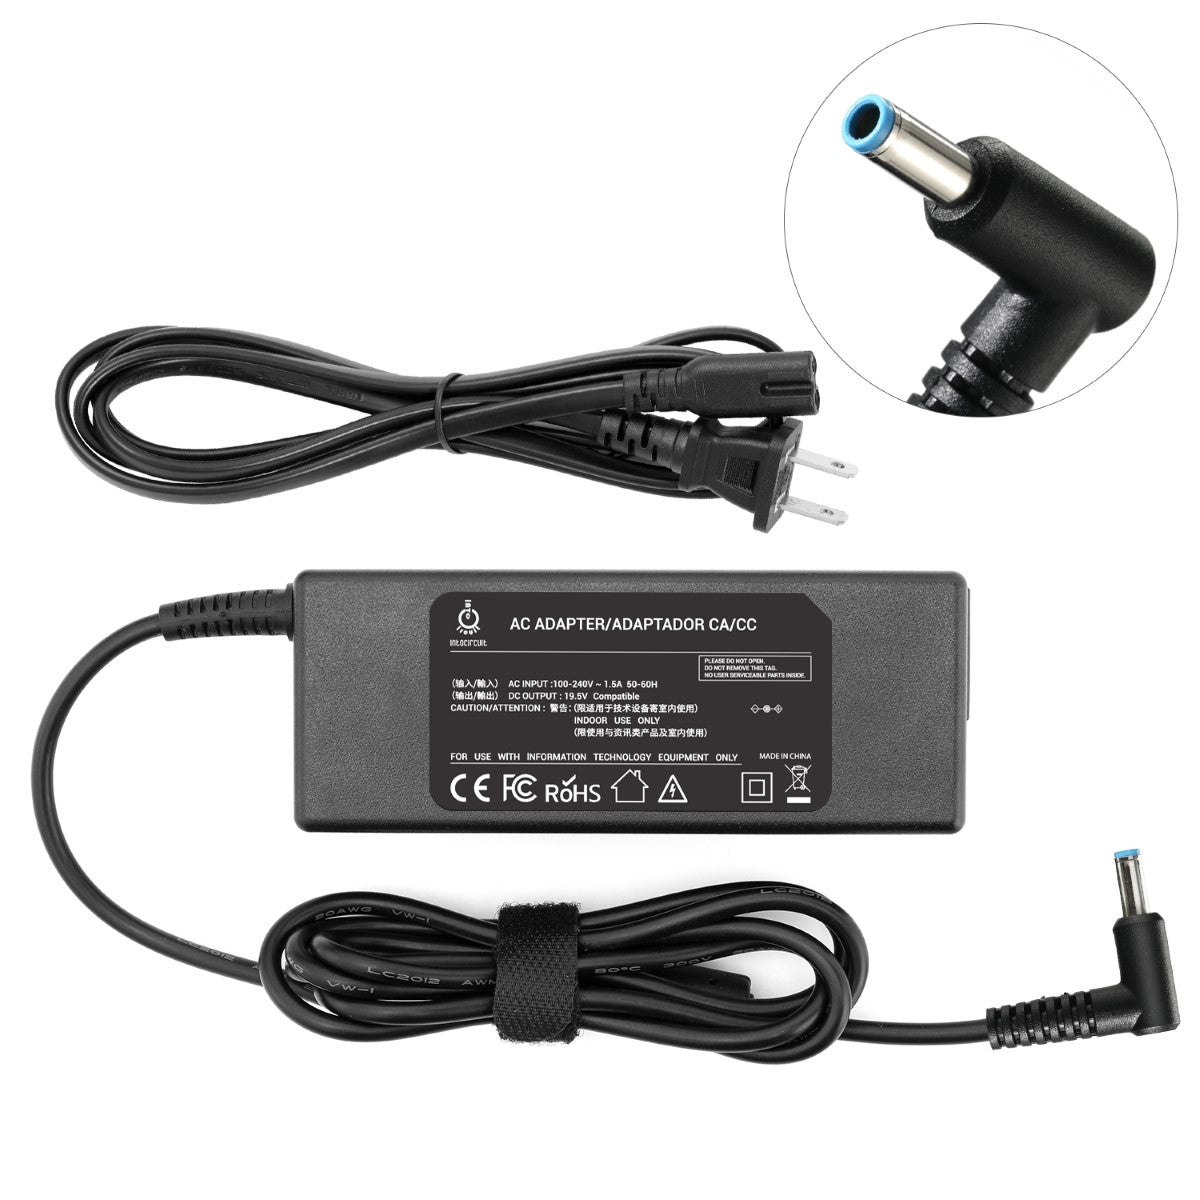 Charger for HP 15-g020nr Laptop